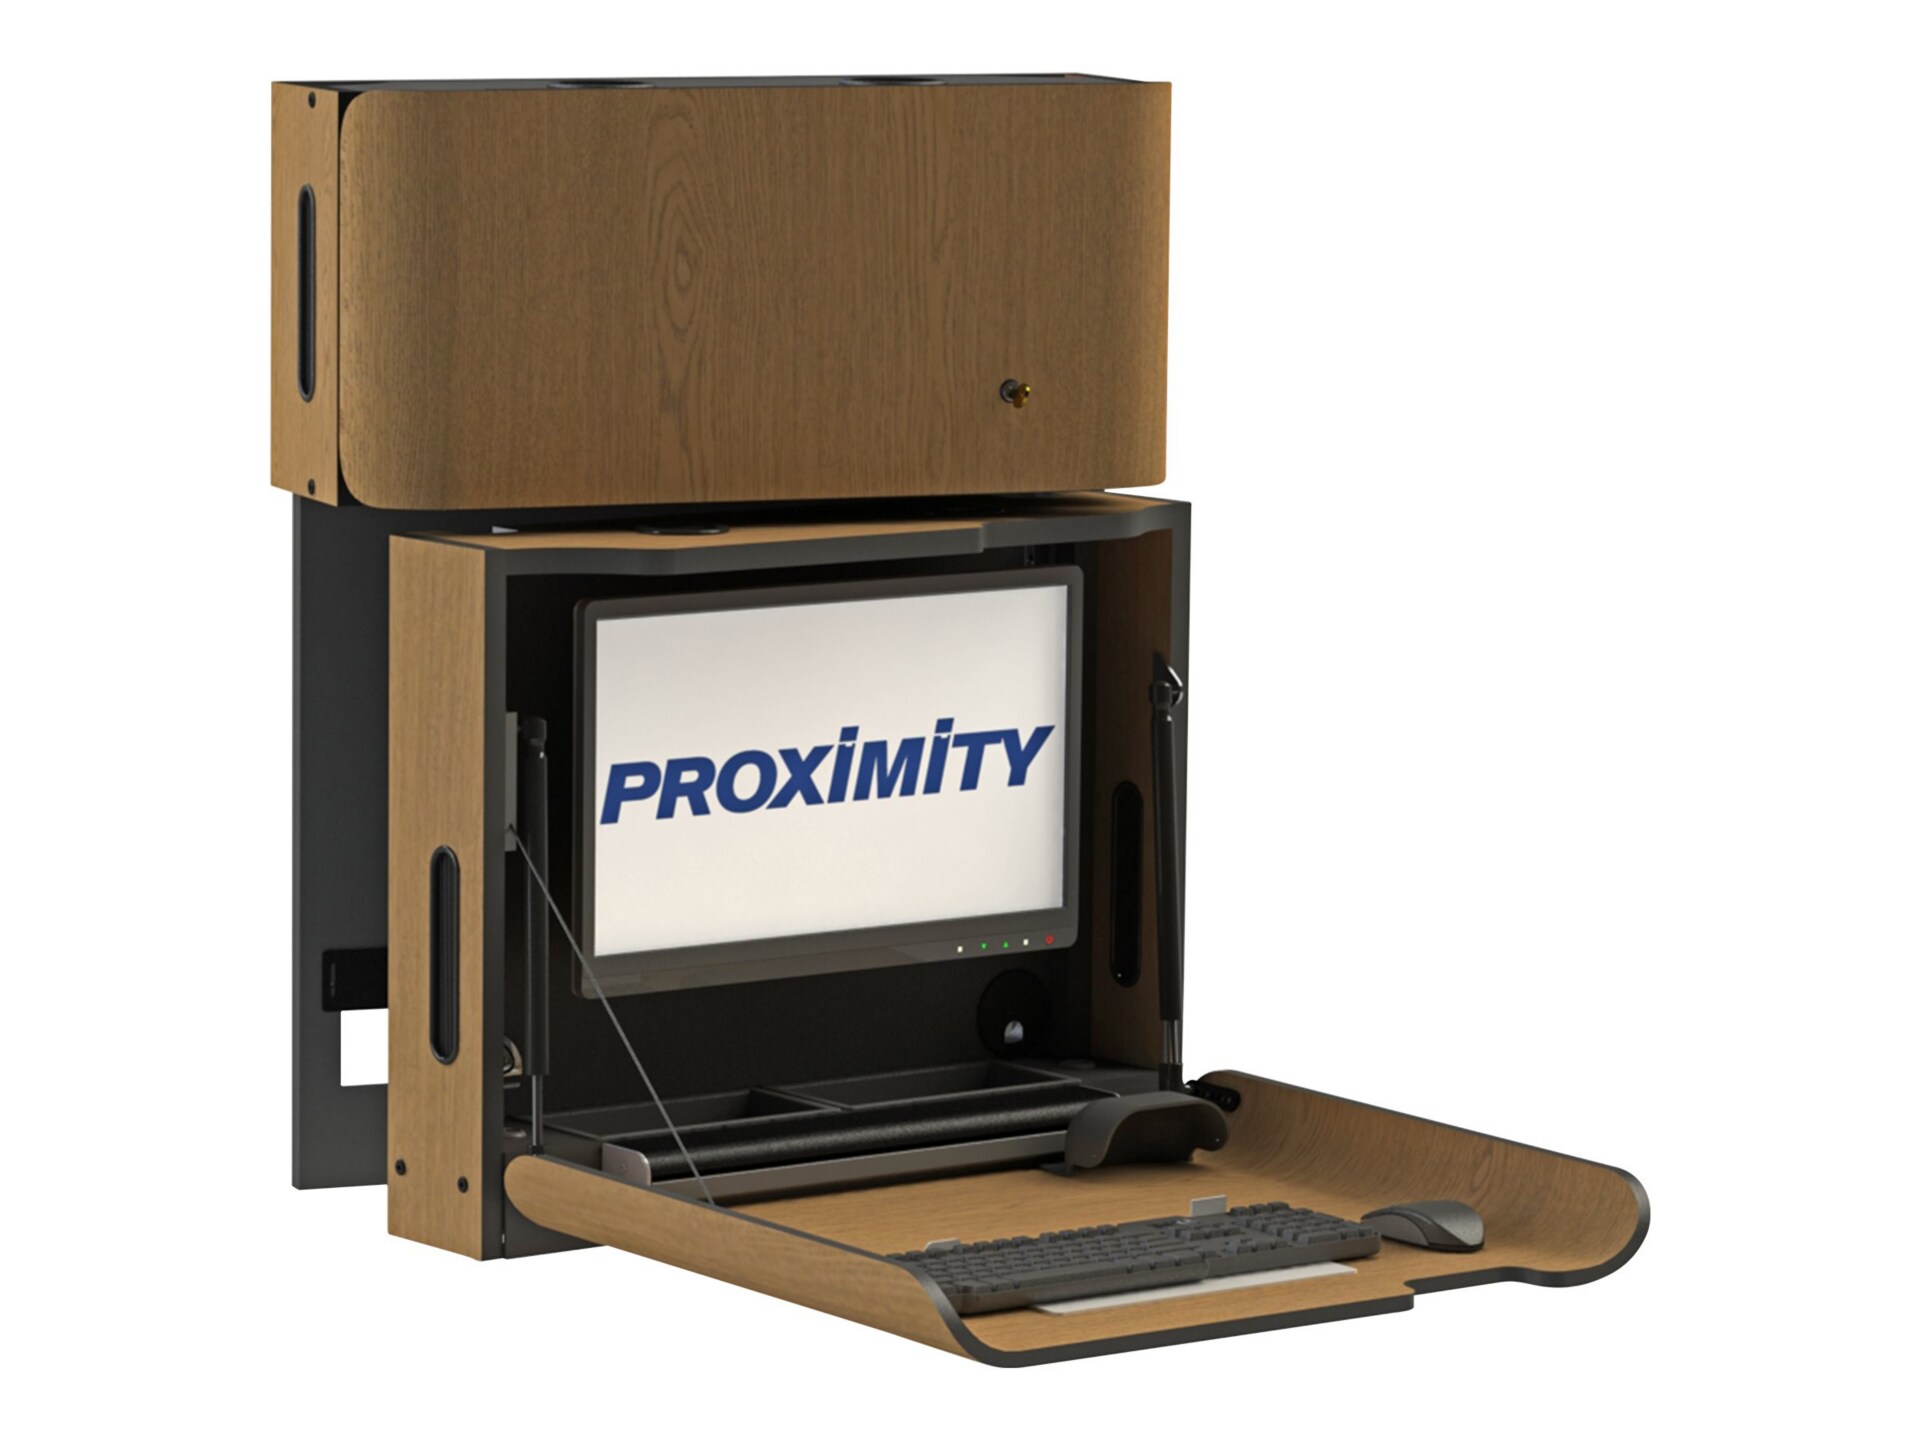 Proximity Classic CXT-28-RSVL-T - wall-mounted workstation